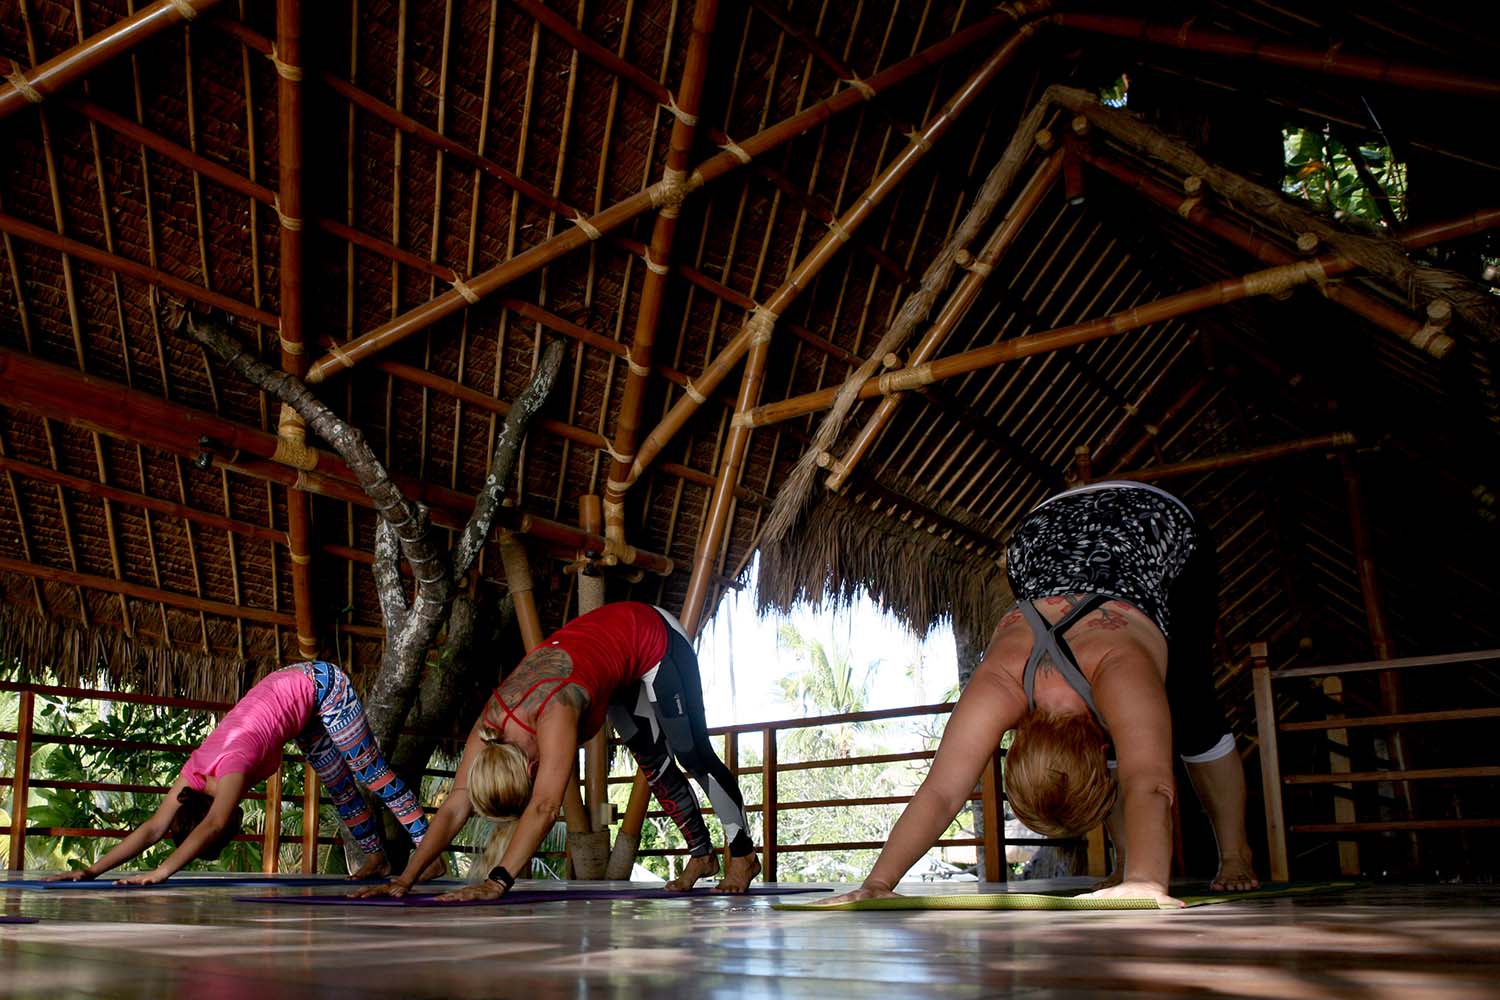 A yoga class with Kino MacGregor's husband Tim feldmann at the Atmosphere Resort tree house in the Philippines